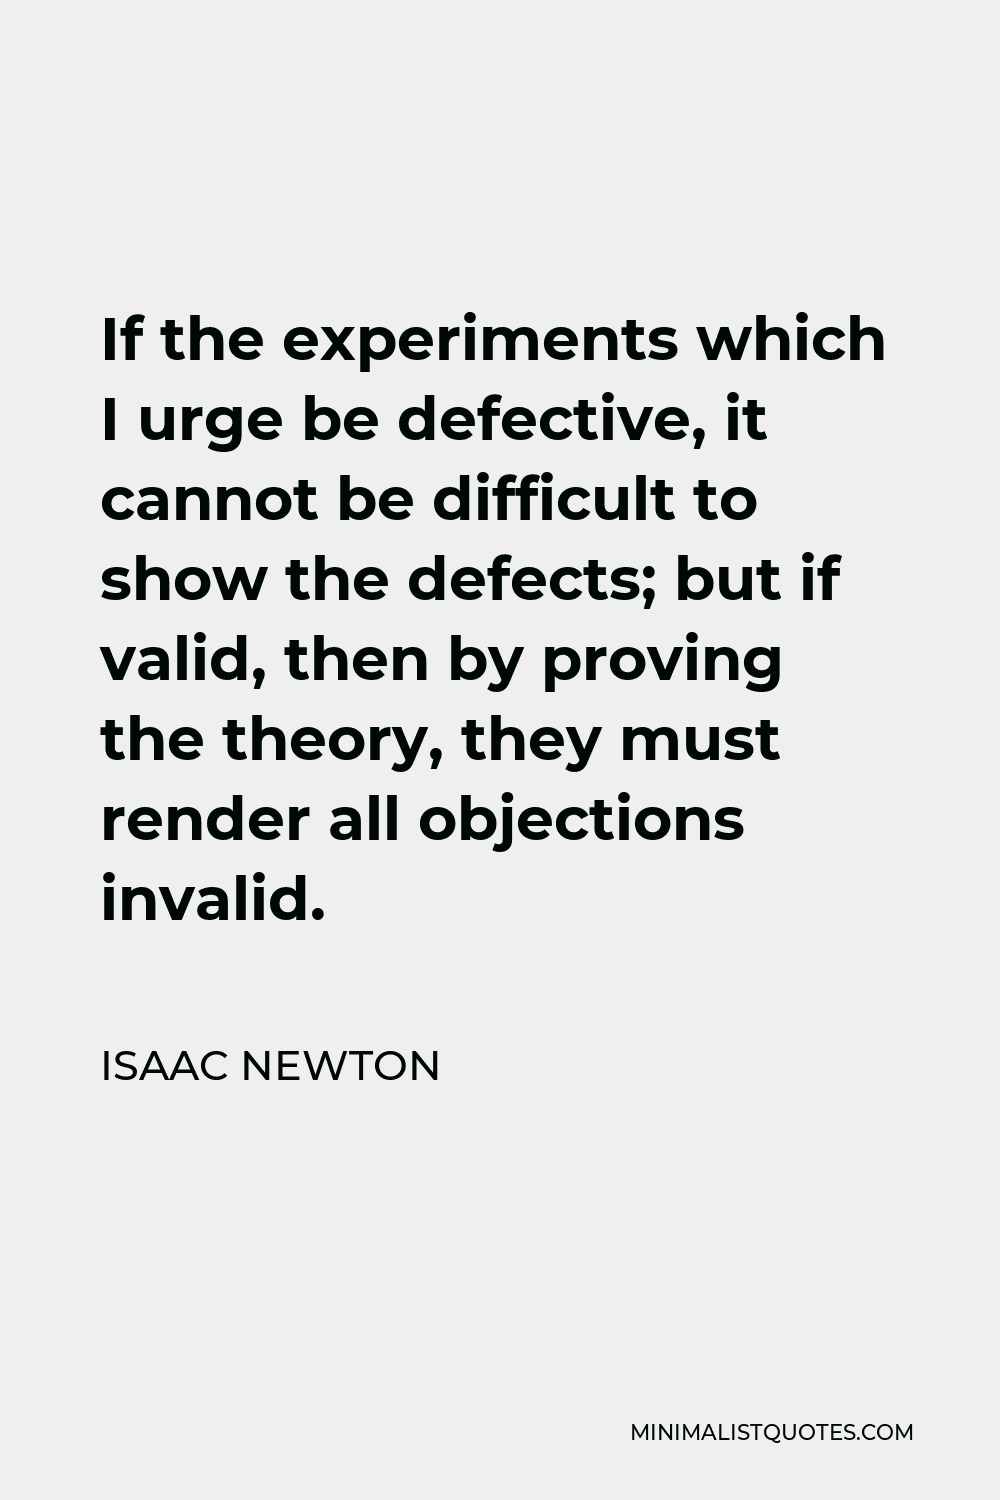 Isaac Newton Quote - If the experiments which I urge be defective, it cannot be difficult to show the defects; but if valid, then by proving the theory, they must render all objections invalid.